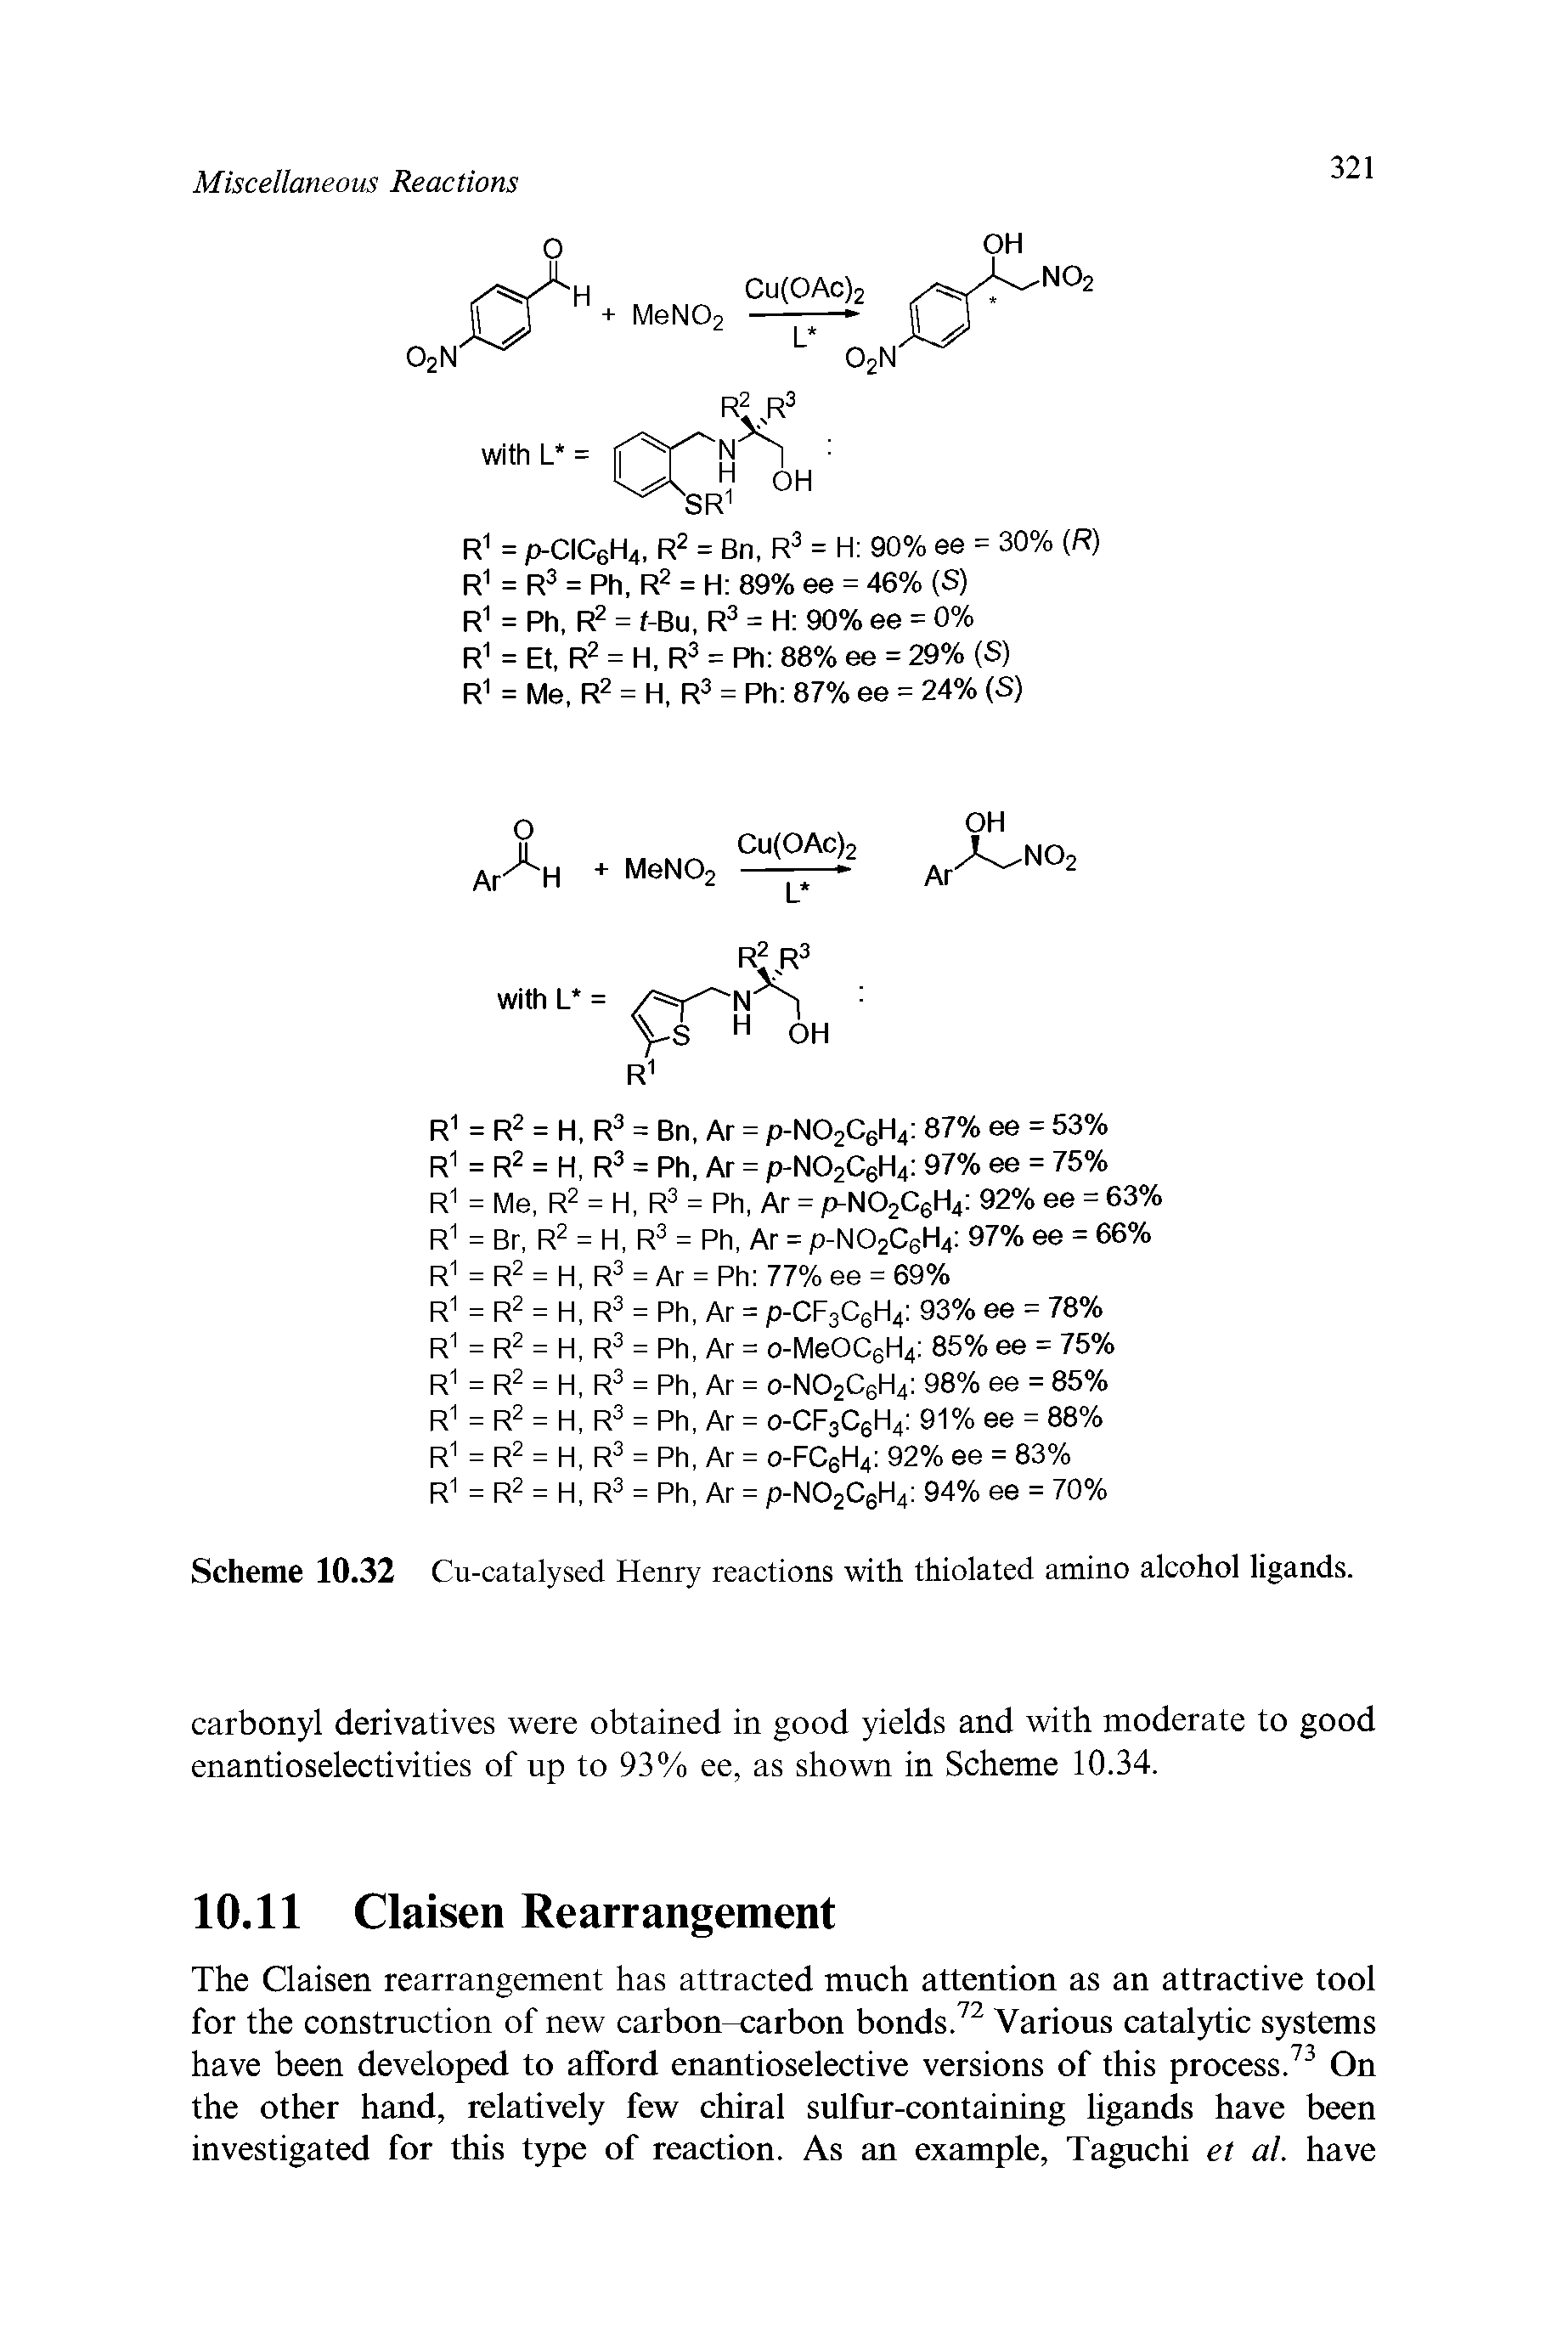 Scheme 10.32 Cu-catalysed Henry reactions with thiolated amino alcohol ligands.